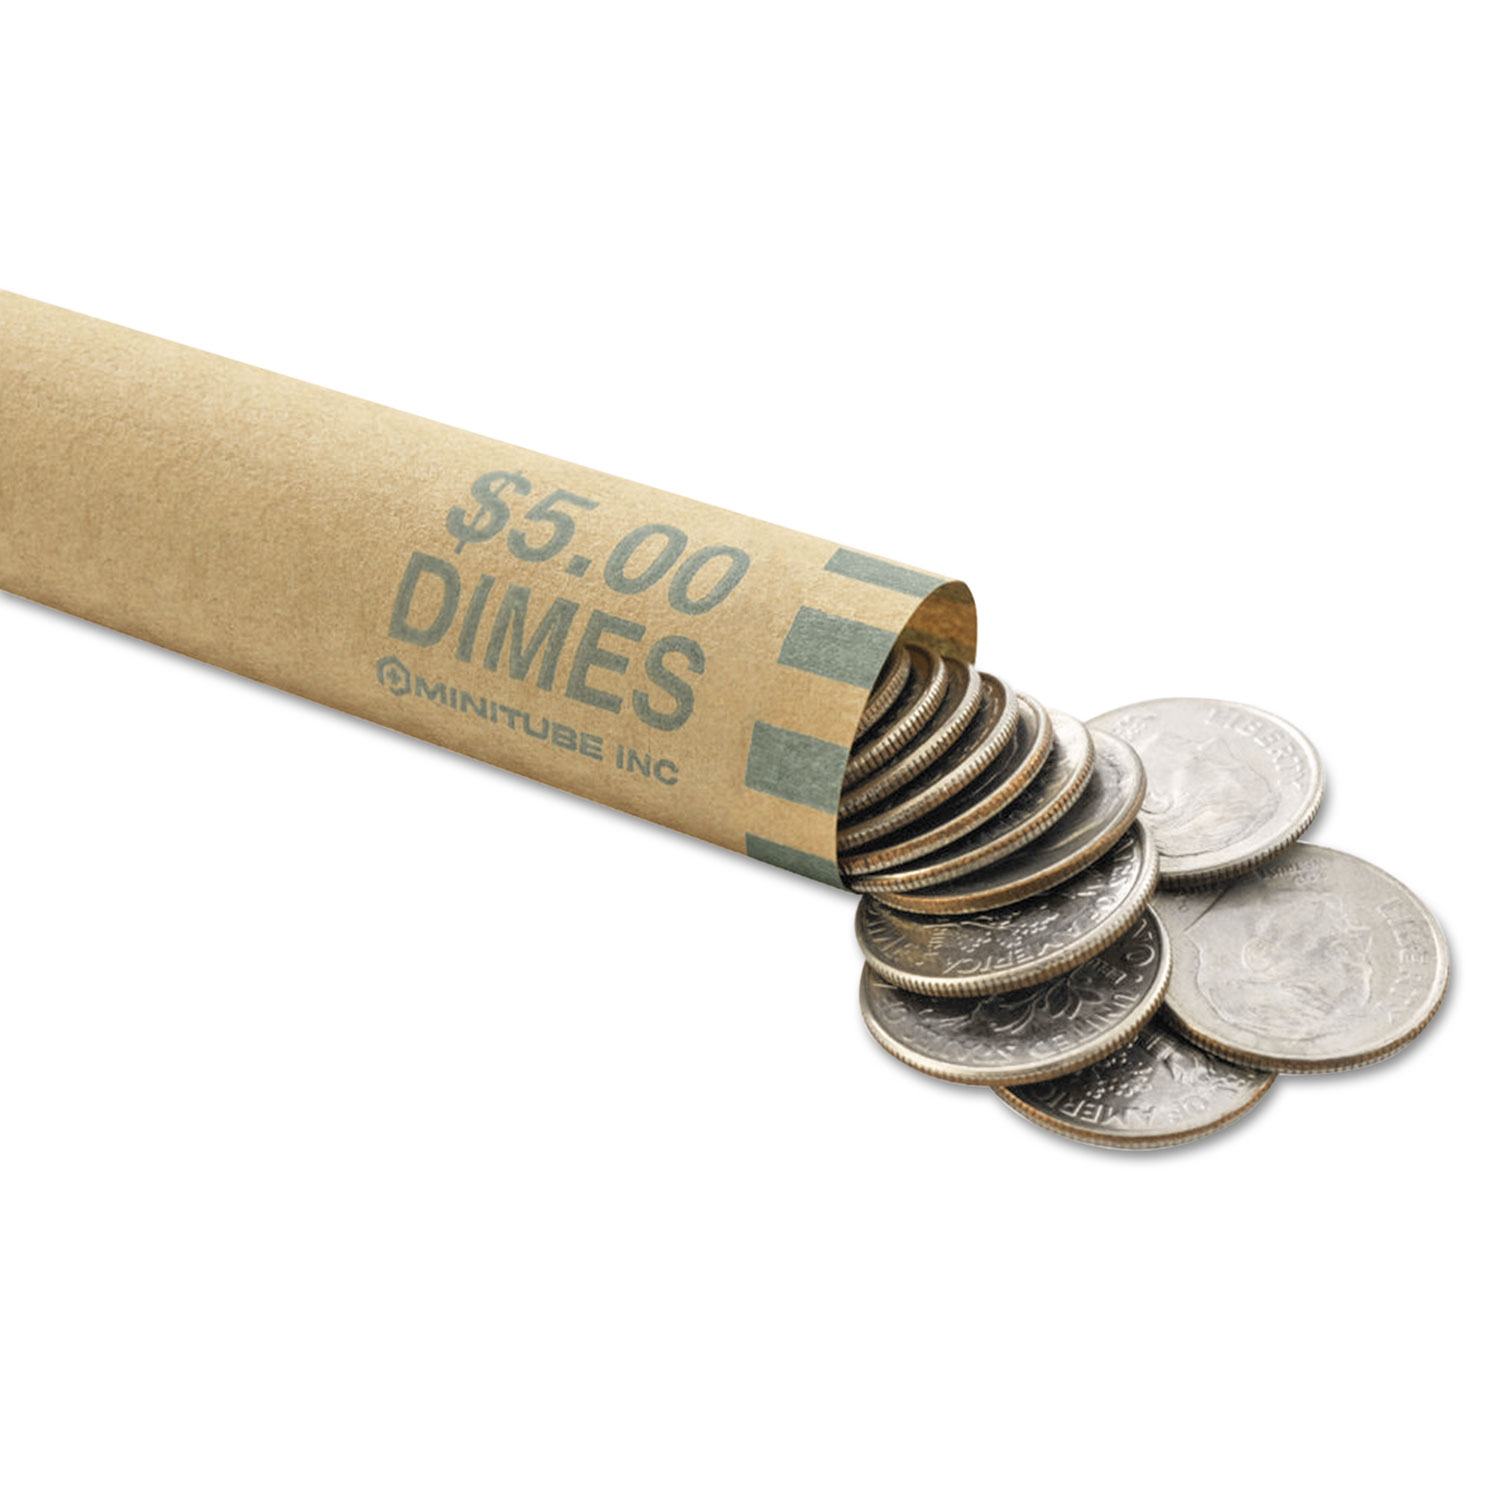  MMF Industries 2160640C02 Nested Preformed Coin Wrappers, Dimes, $5.00, Green, 1000 Wrappers/Box (MMF2160640C02) 